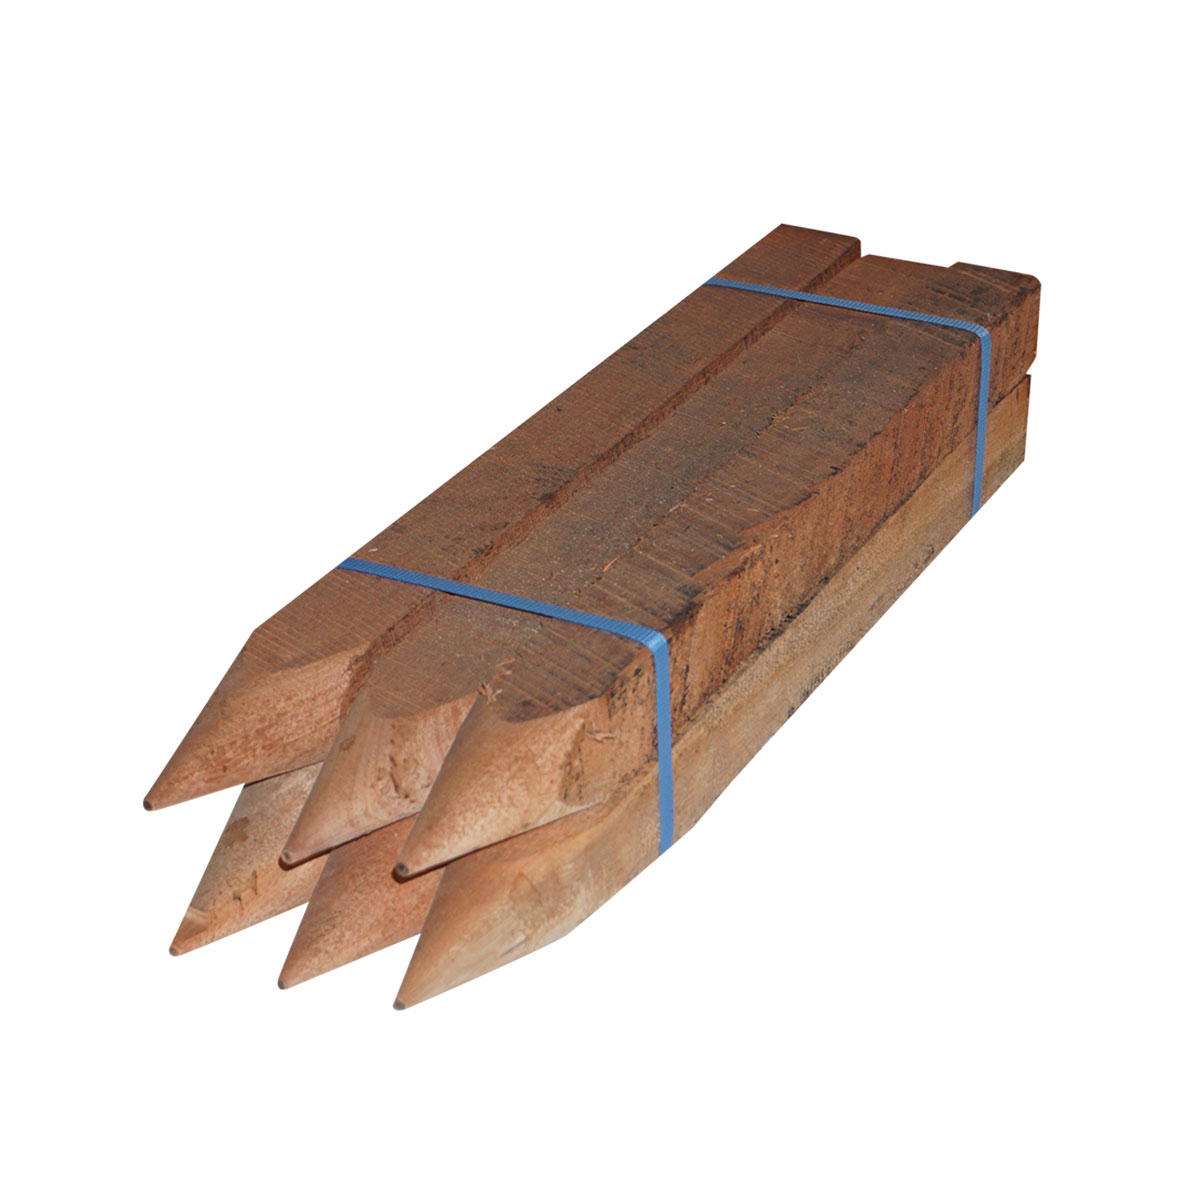 Hardwood Stakes 50 x 50 x 600mm - 6 Pack